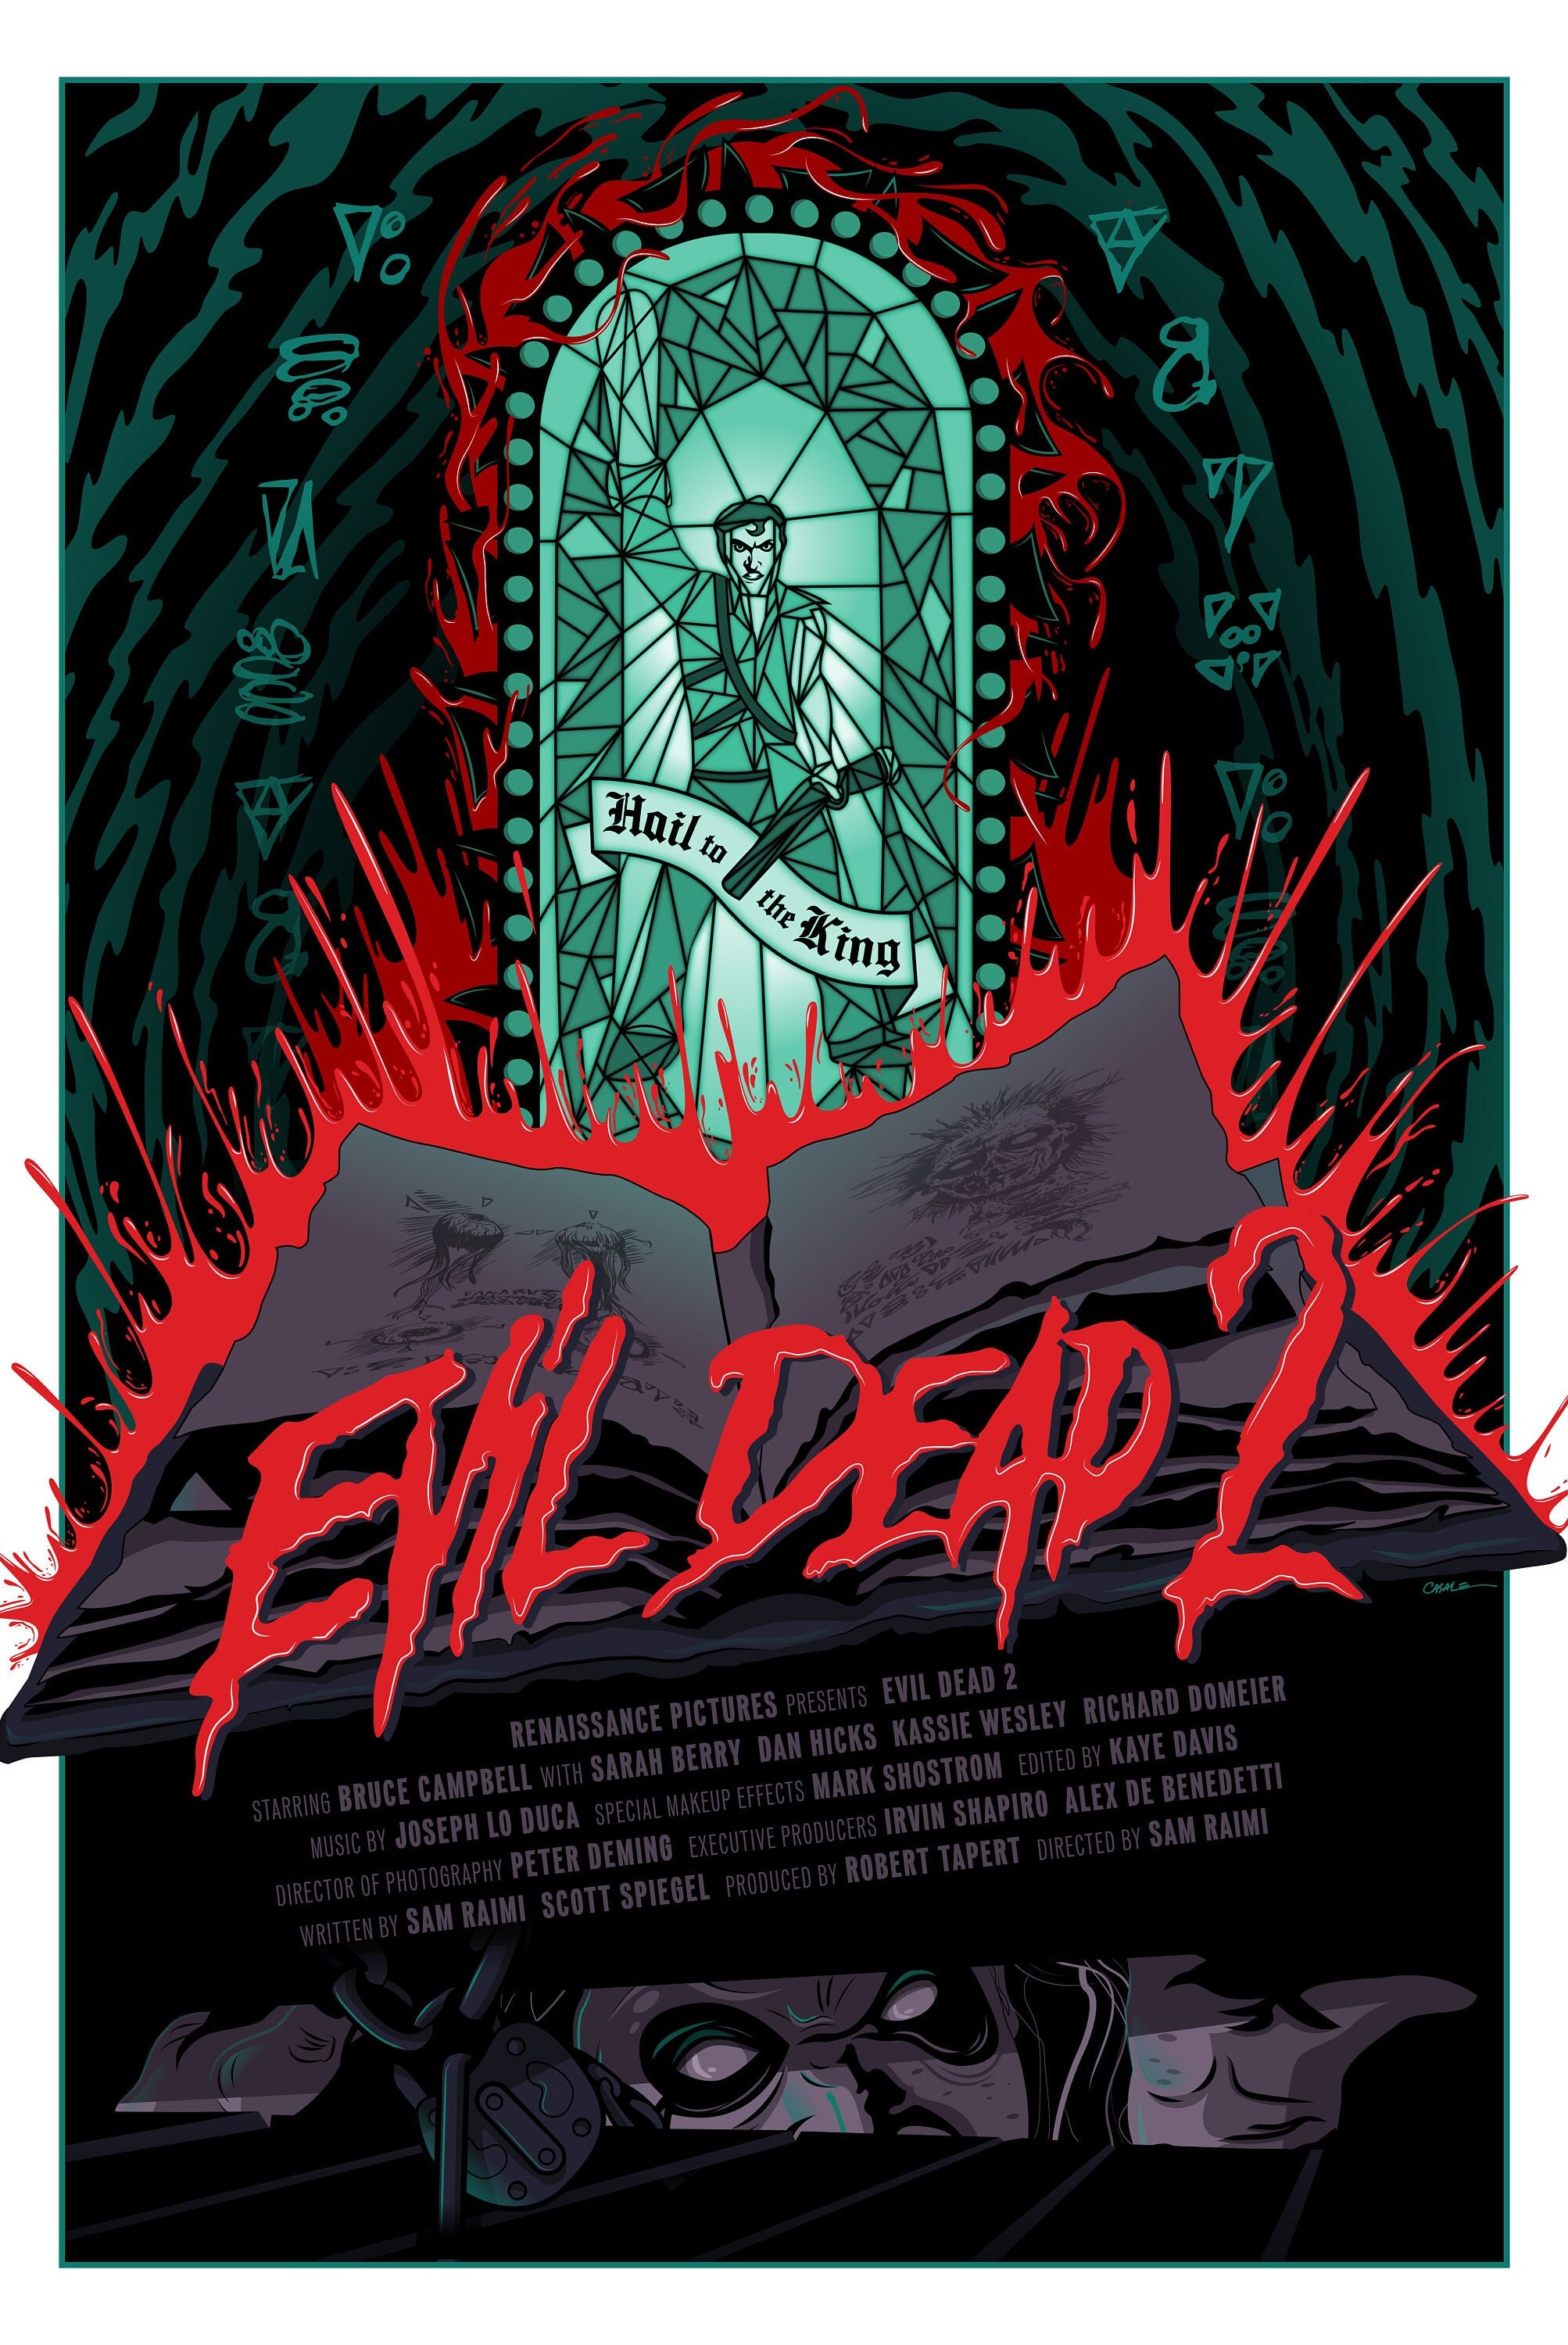 Evil Dead Rise by Christopher Cook - Home of the Alternative Movie Poster  -AMP